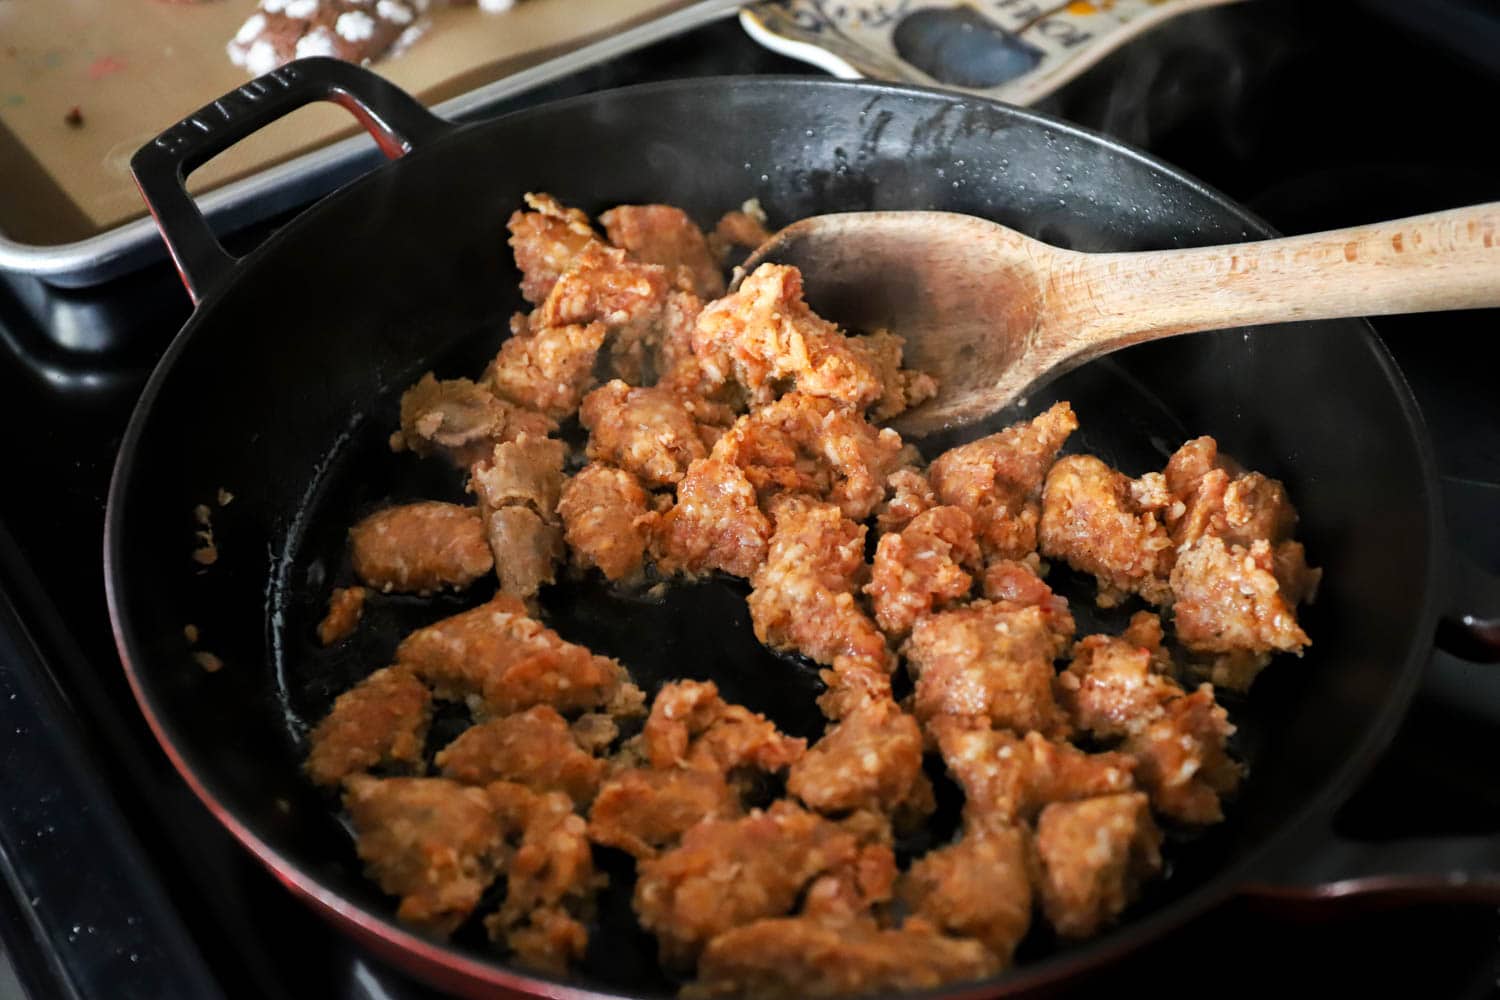 skillet of brown crumbly sausage